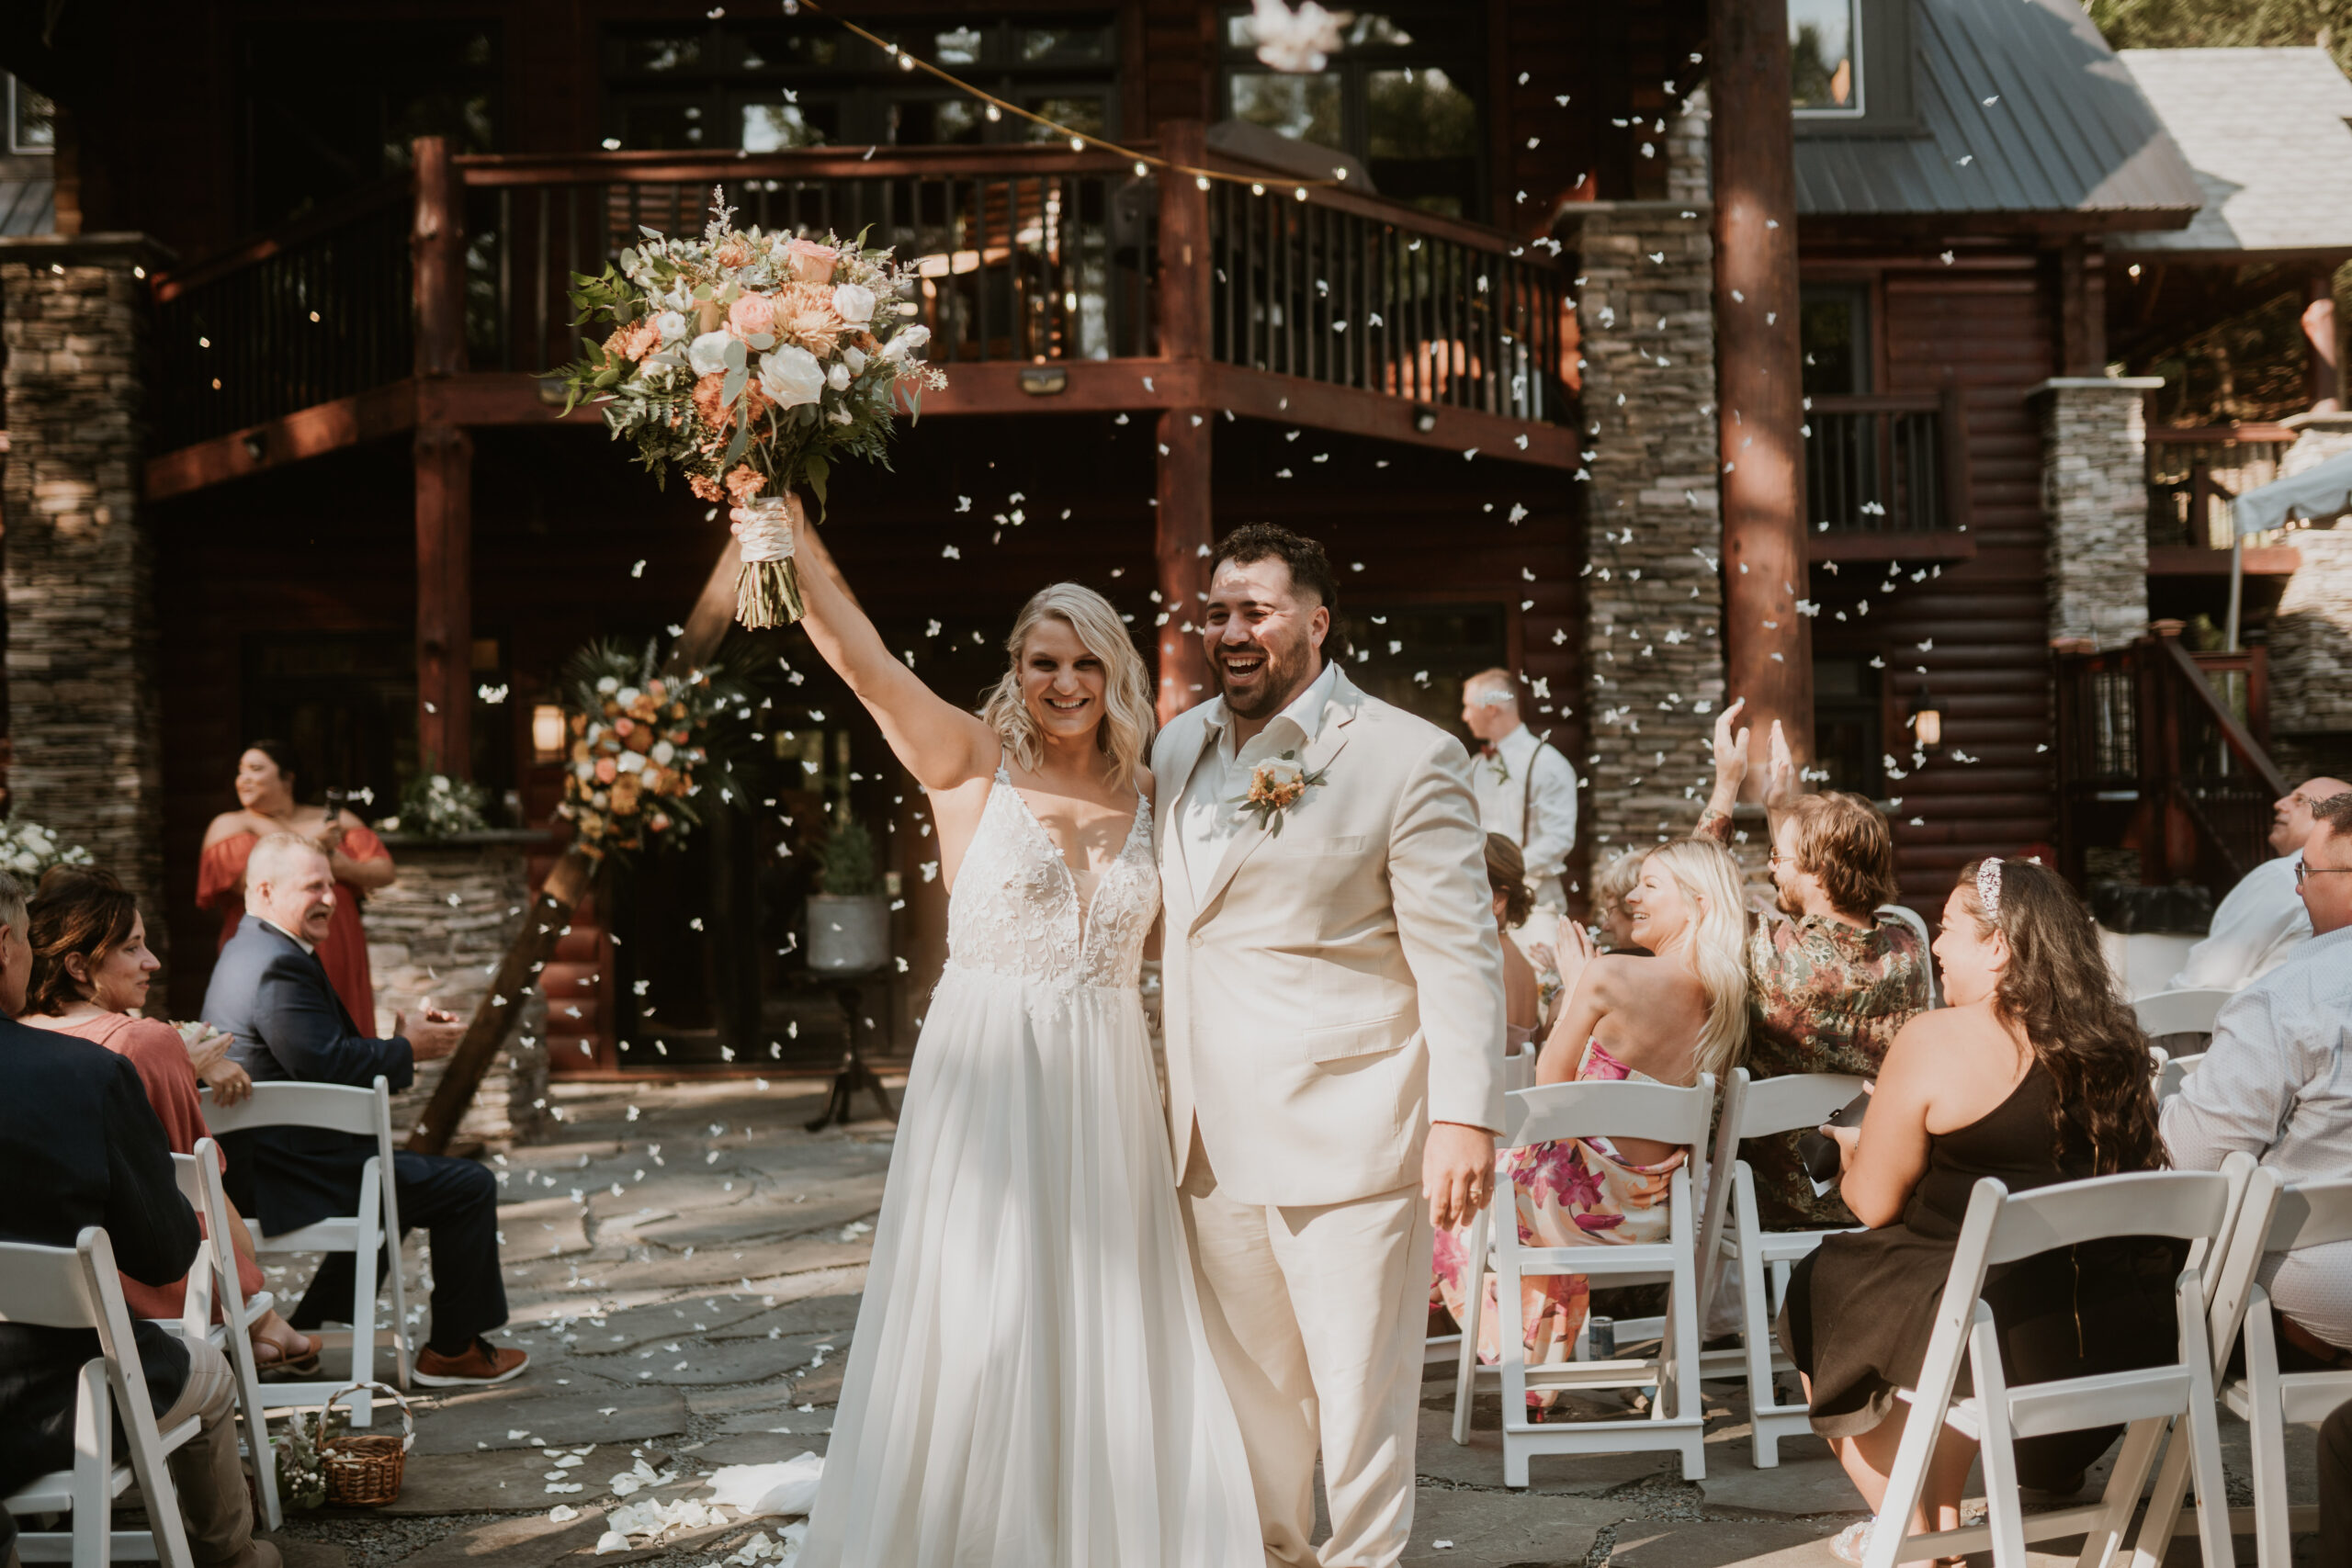 Shelby + Anthony: Woodsy Intimate Micro-Wedding in the Poconos 